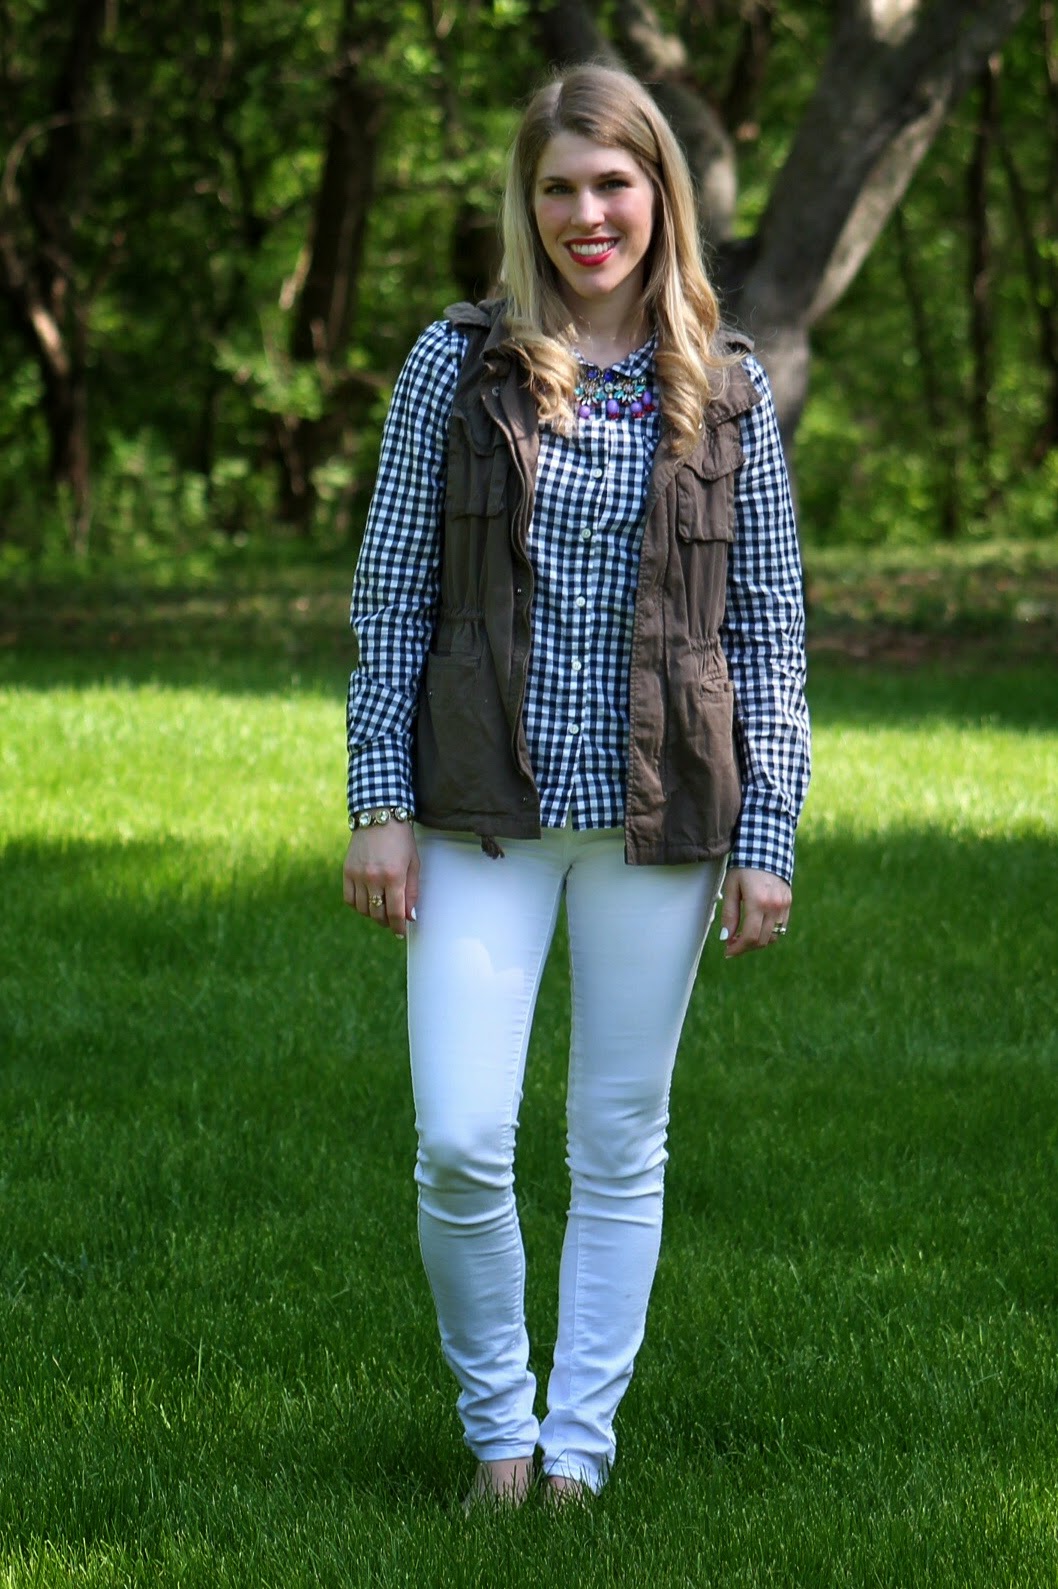 Gingham, White Jeans, and Utility Vest